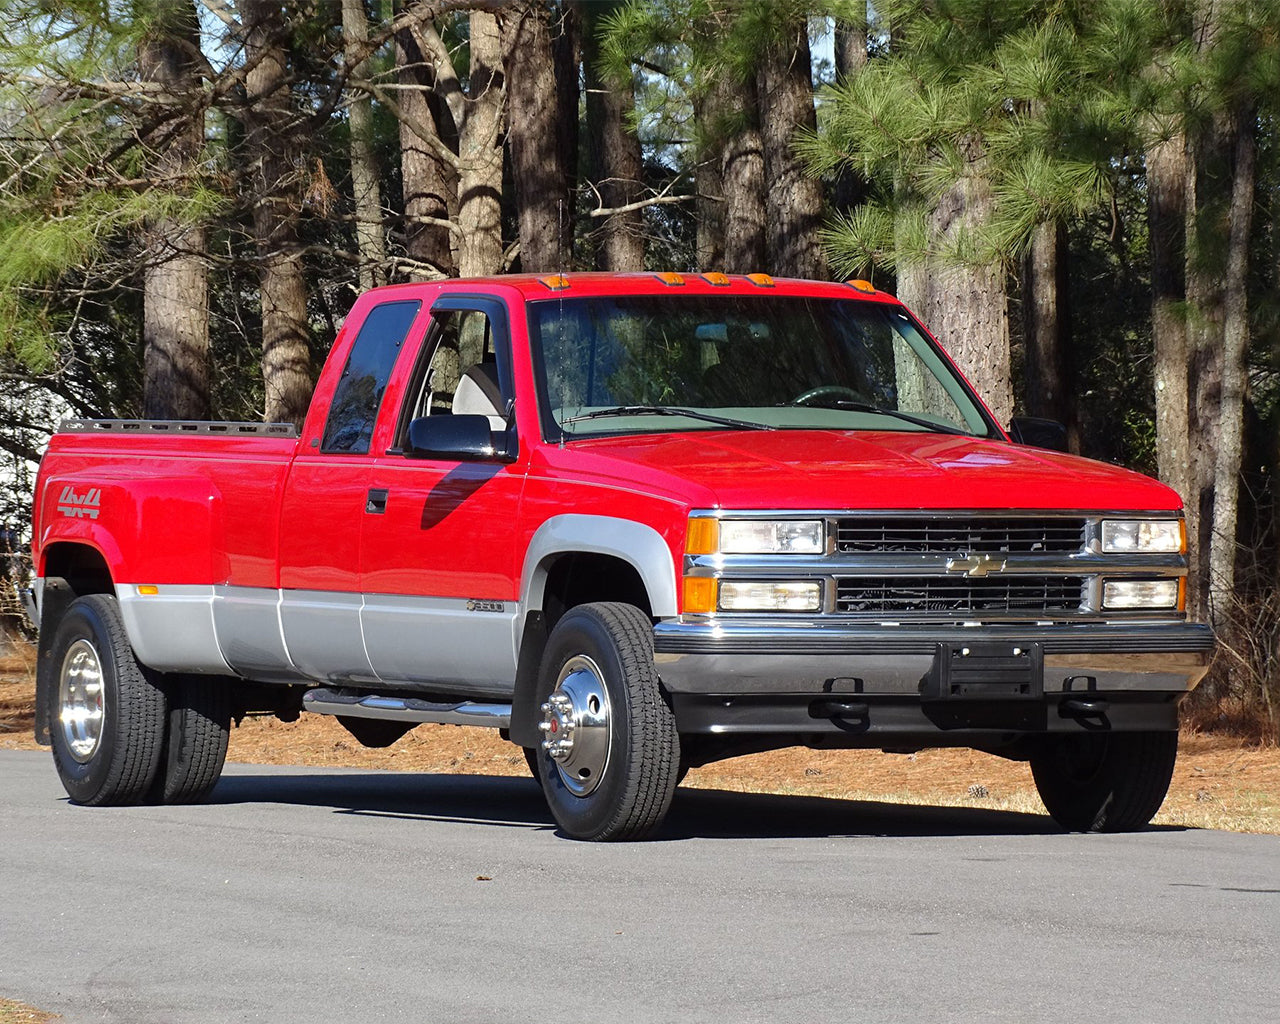 Red Chevrolet C3500 truck parked next to large trees